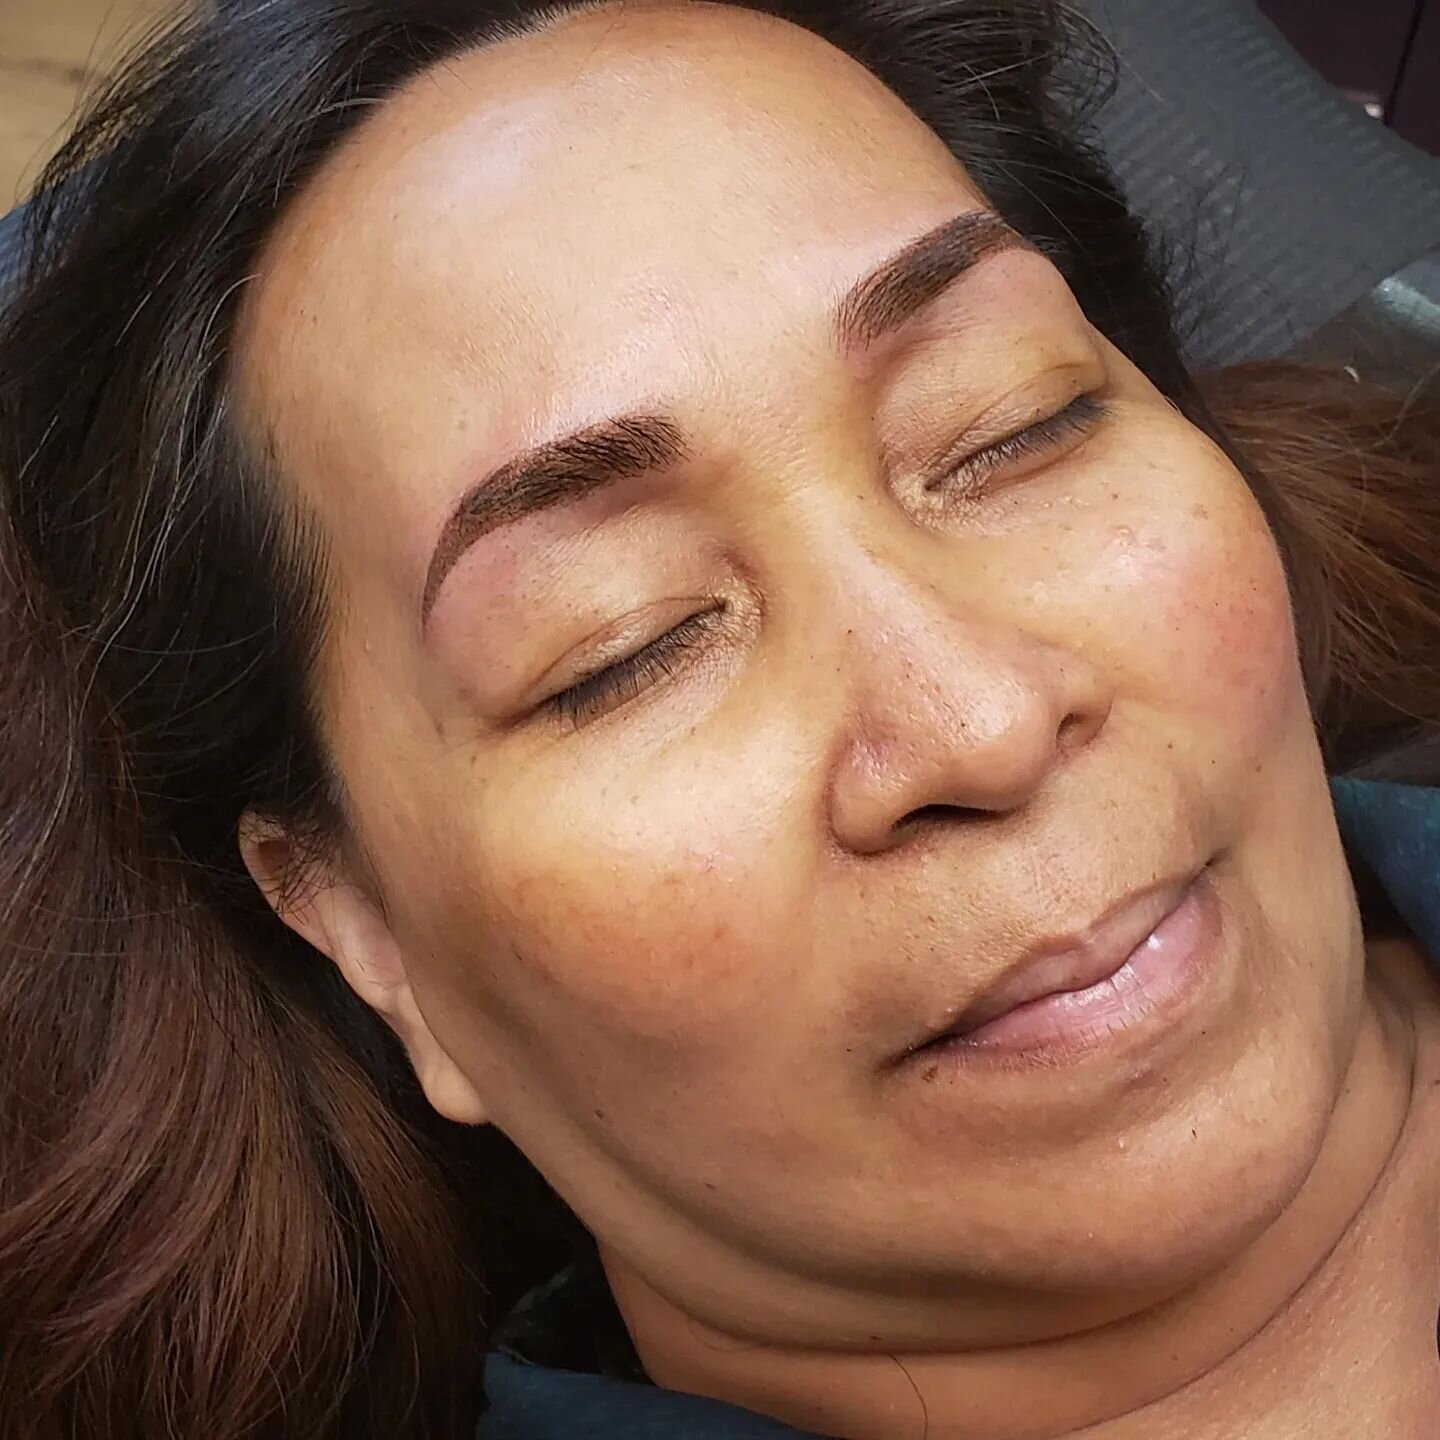 Beautiful powder brows! 😍 

She had a lot of brow growth but her natural shape had very high peaks she wanted to soften and get more definition and color. Powder brows were the answer for her since she had so much hair growth. We kept the applicatio